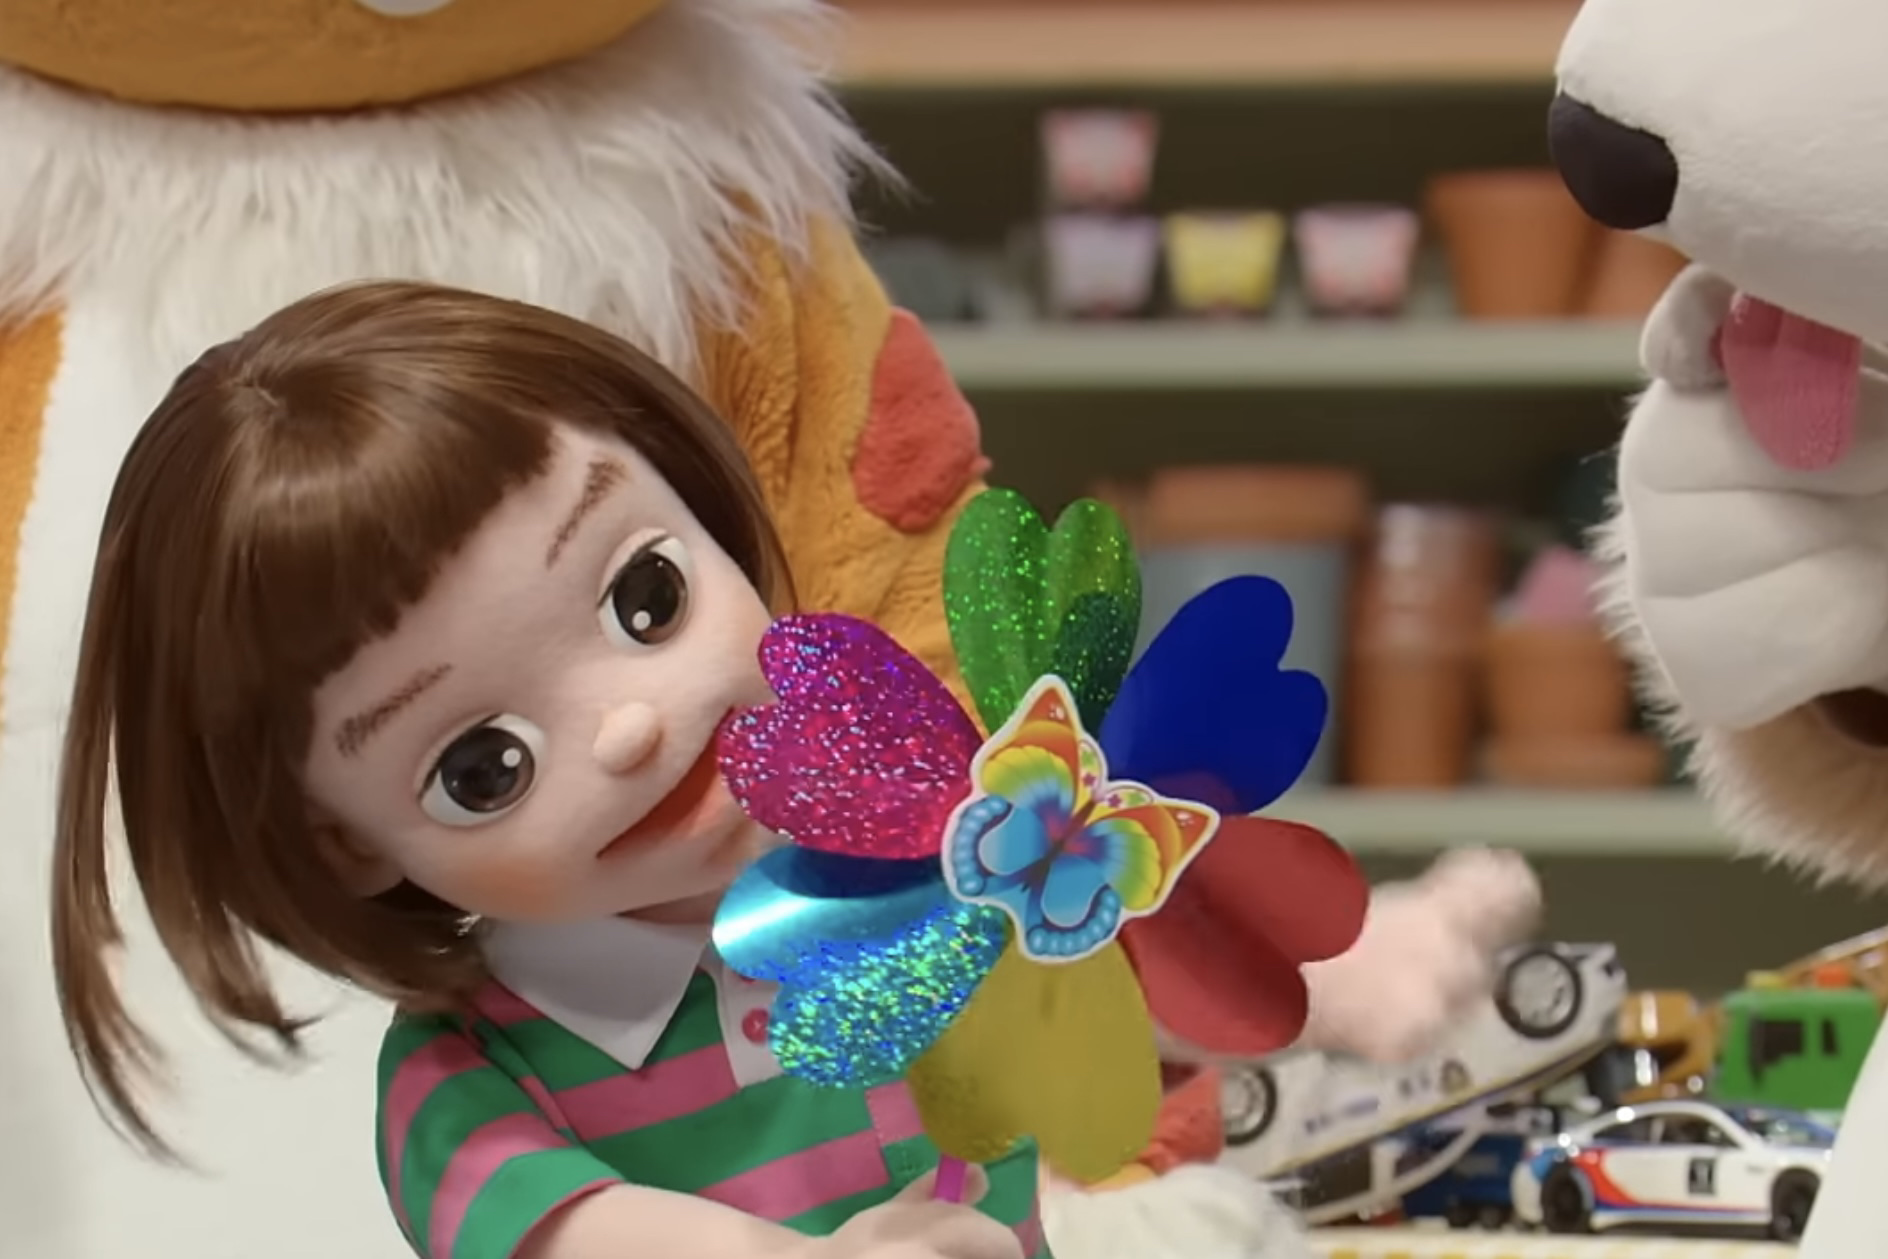 Byeol-i: South Korea's First Autistic Child Character